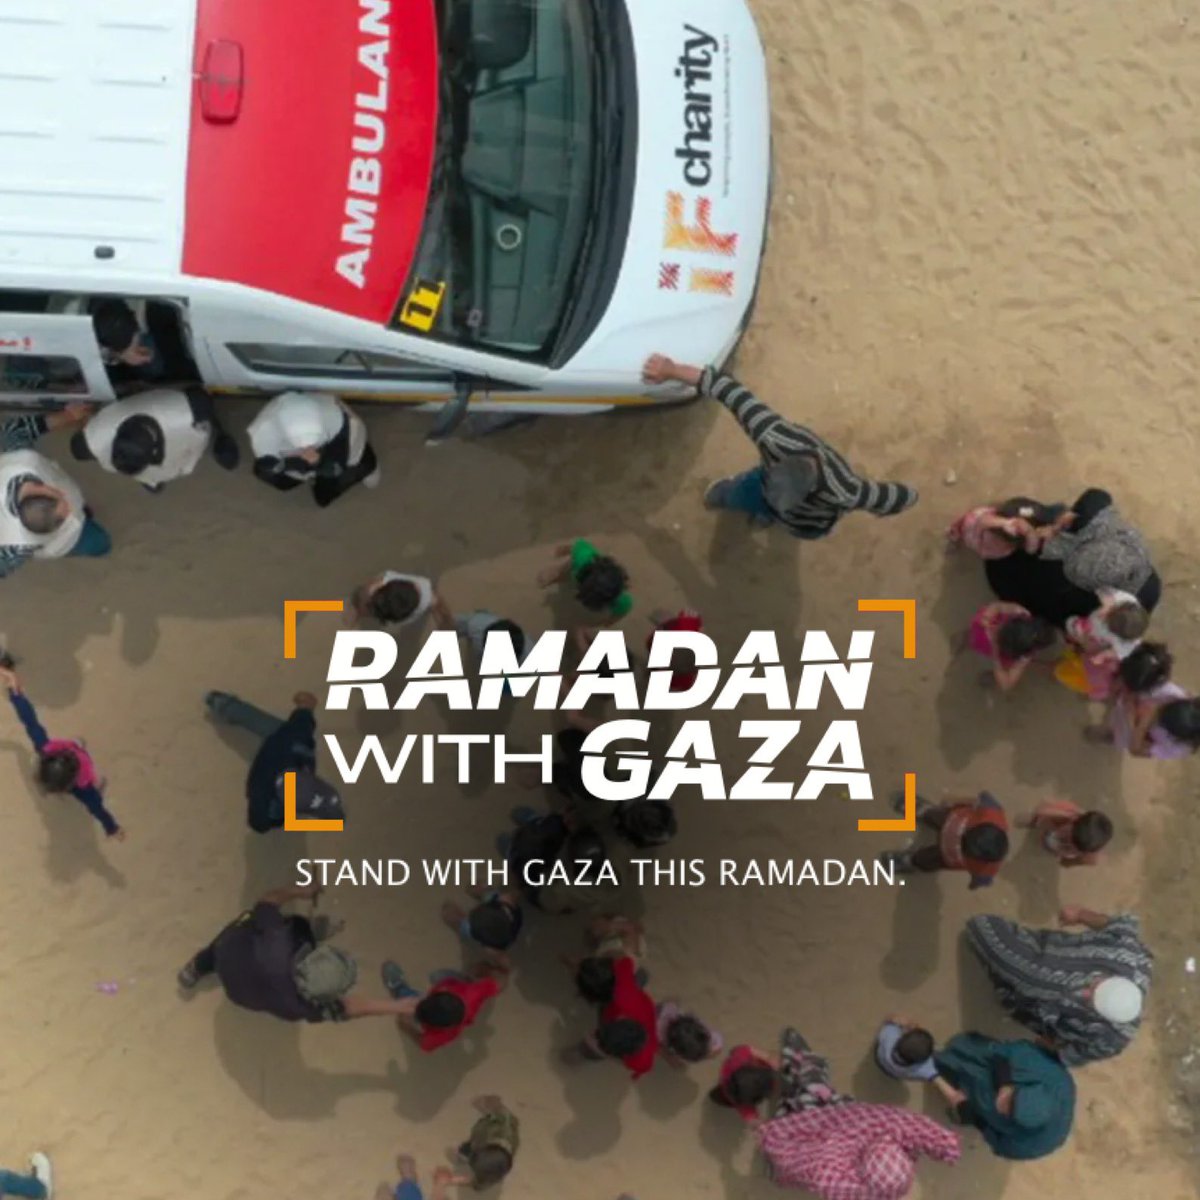 Stand with Gaza this Ramadan! 🇵🇸

Join us in spending this sacred month with our brothers and sisters in Gaza.

Your contribution helps @iFCharityUK make a significant impact on families struggling for their basic needs.

muslimgiving.org/RamadanWithGaza
#RamadanForGaza #StandWithGaza